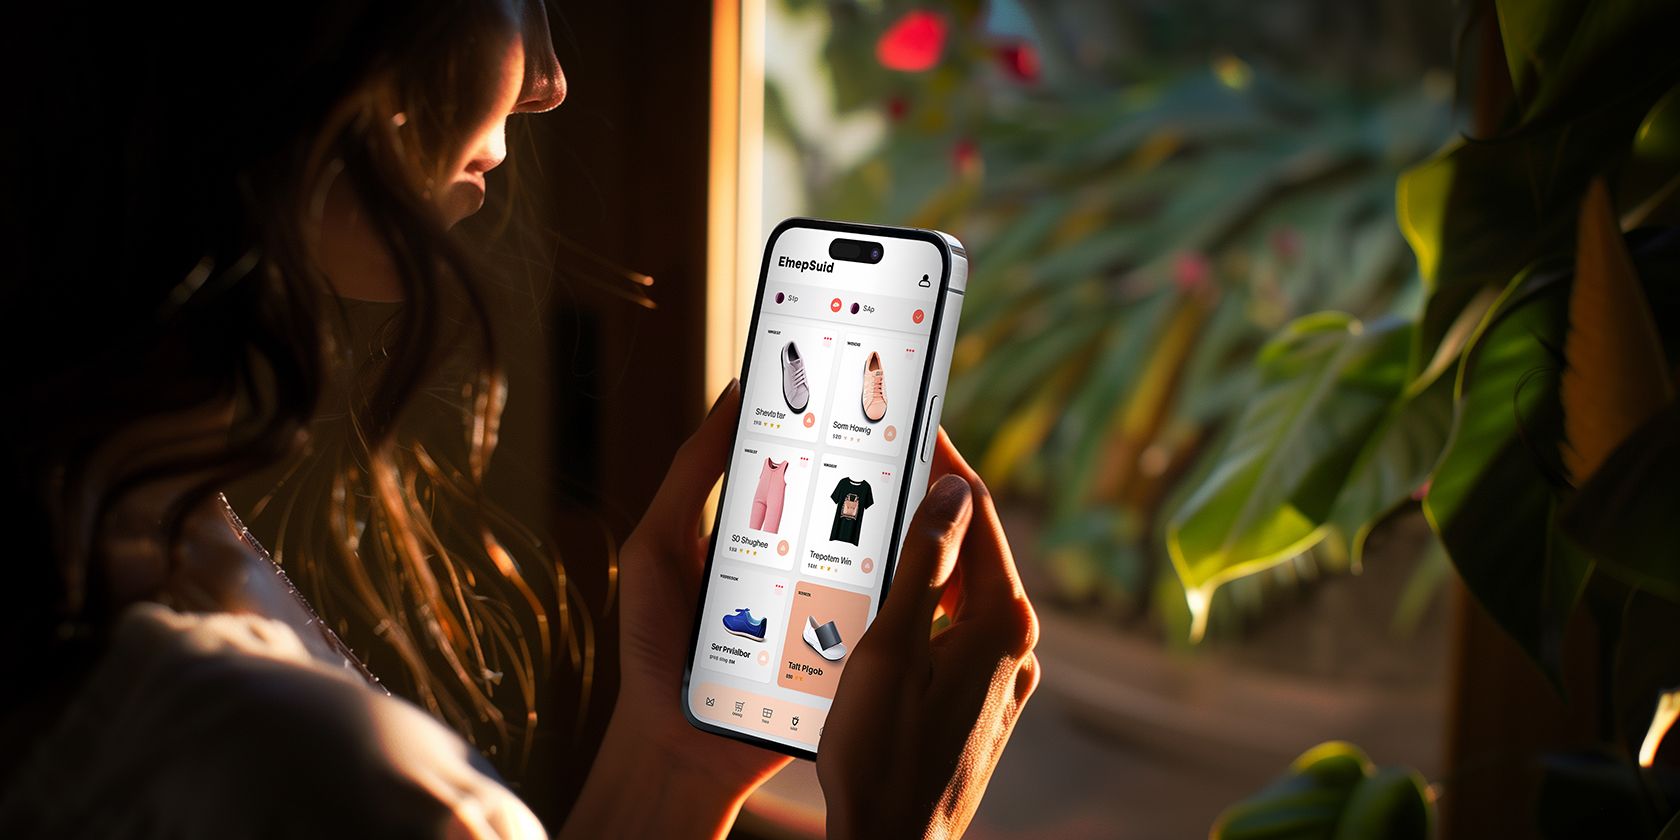 A person using an Iphone displaying an online shopping interface